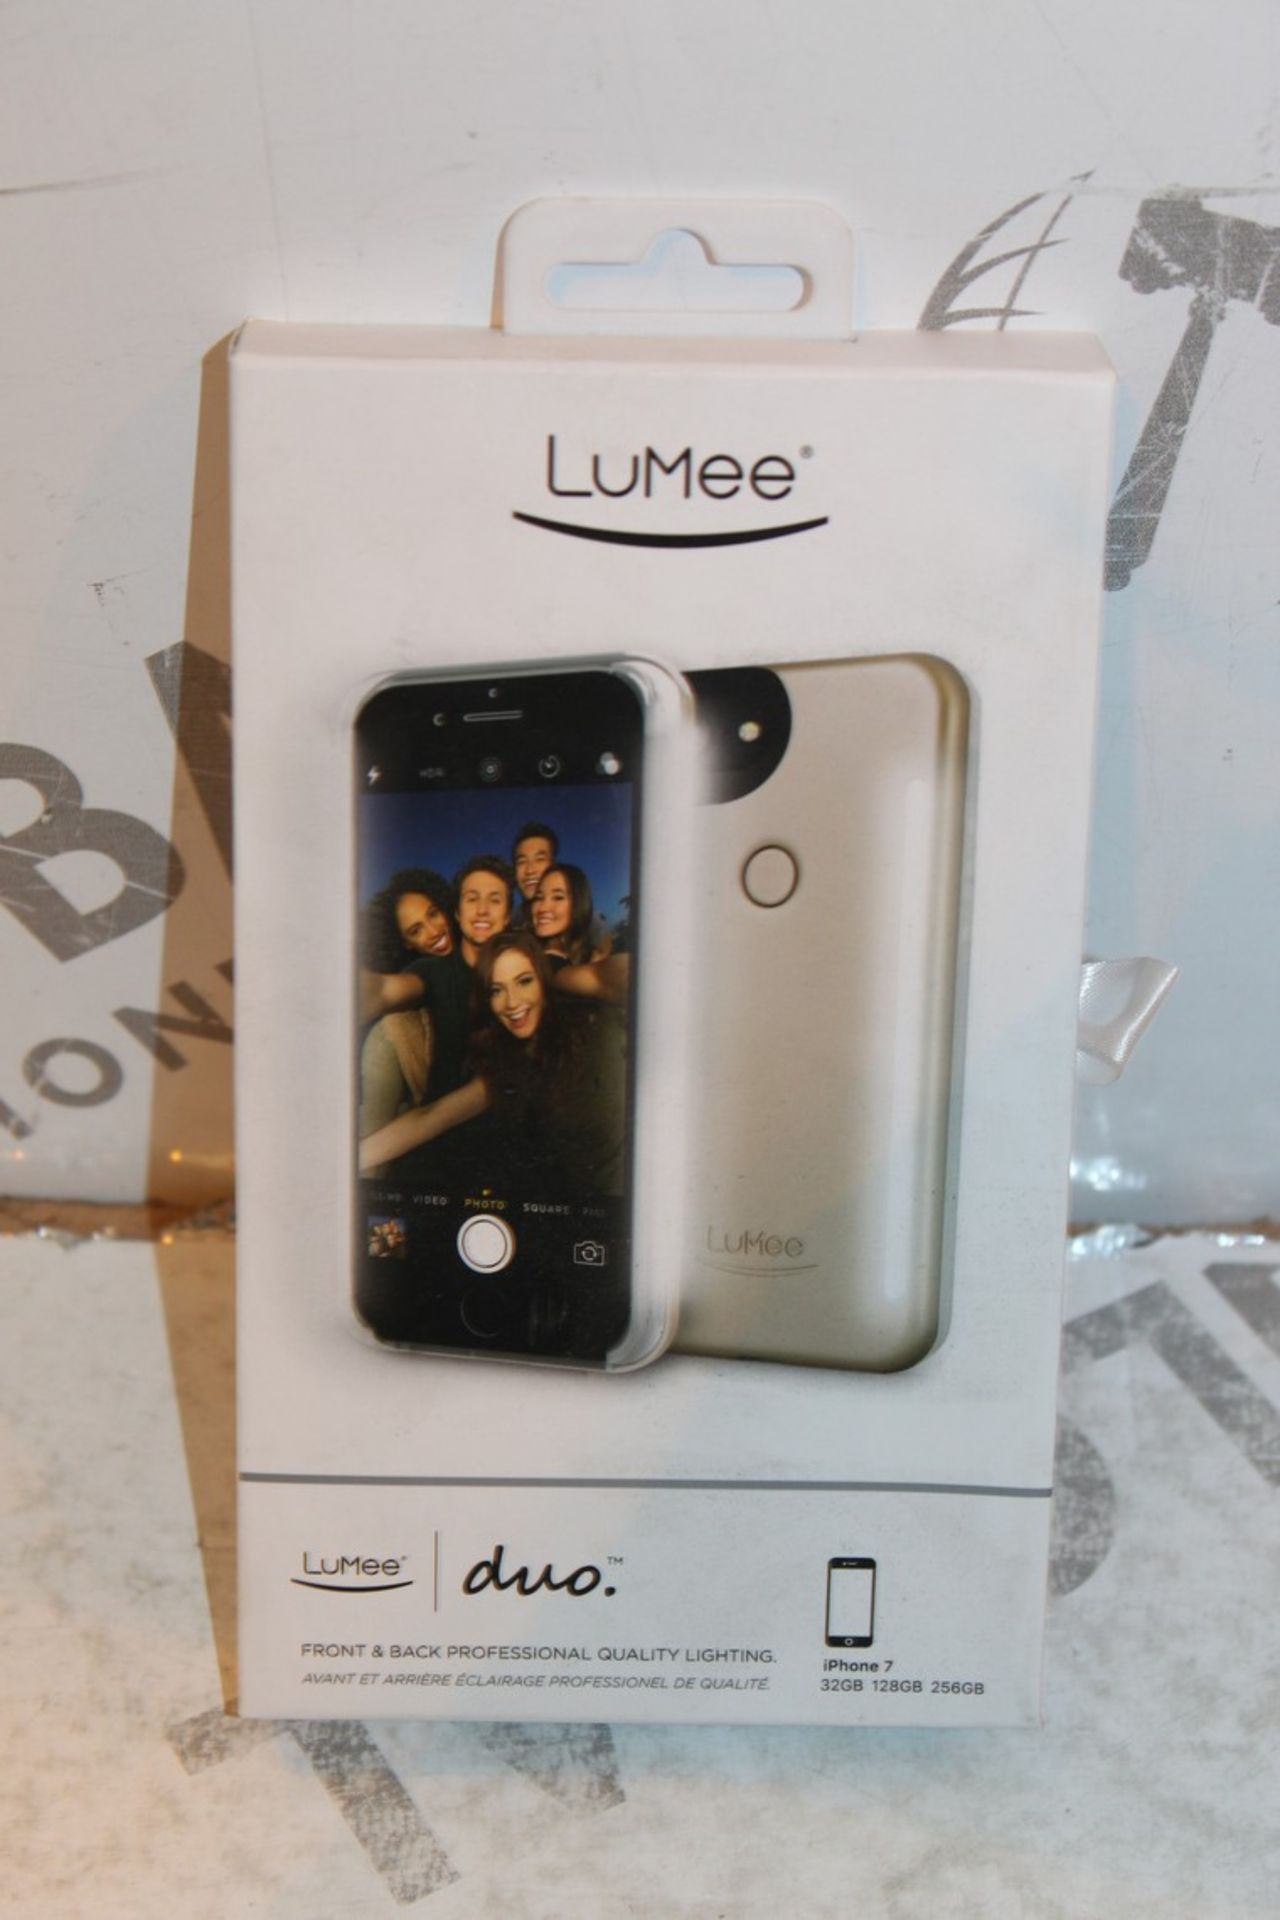 Lot to Contain 2 Boxed Brand New Lumee Duo Iphone 7 Perfect Lighting Phone Cases (Gold) RRP £100 (